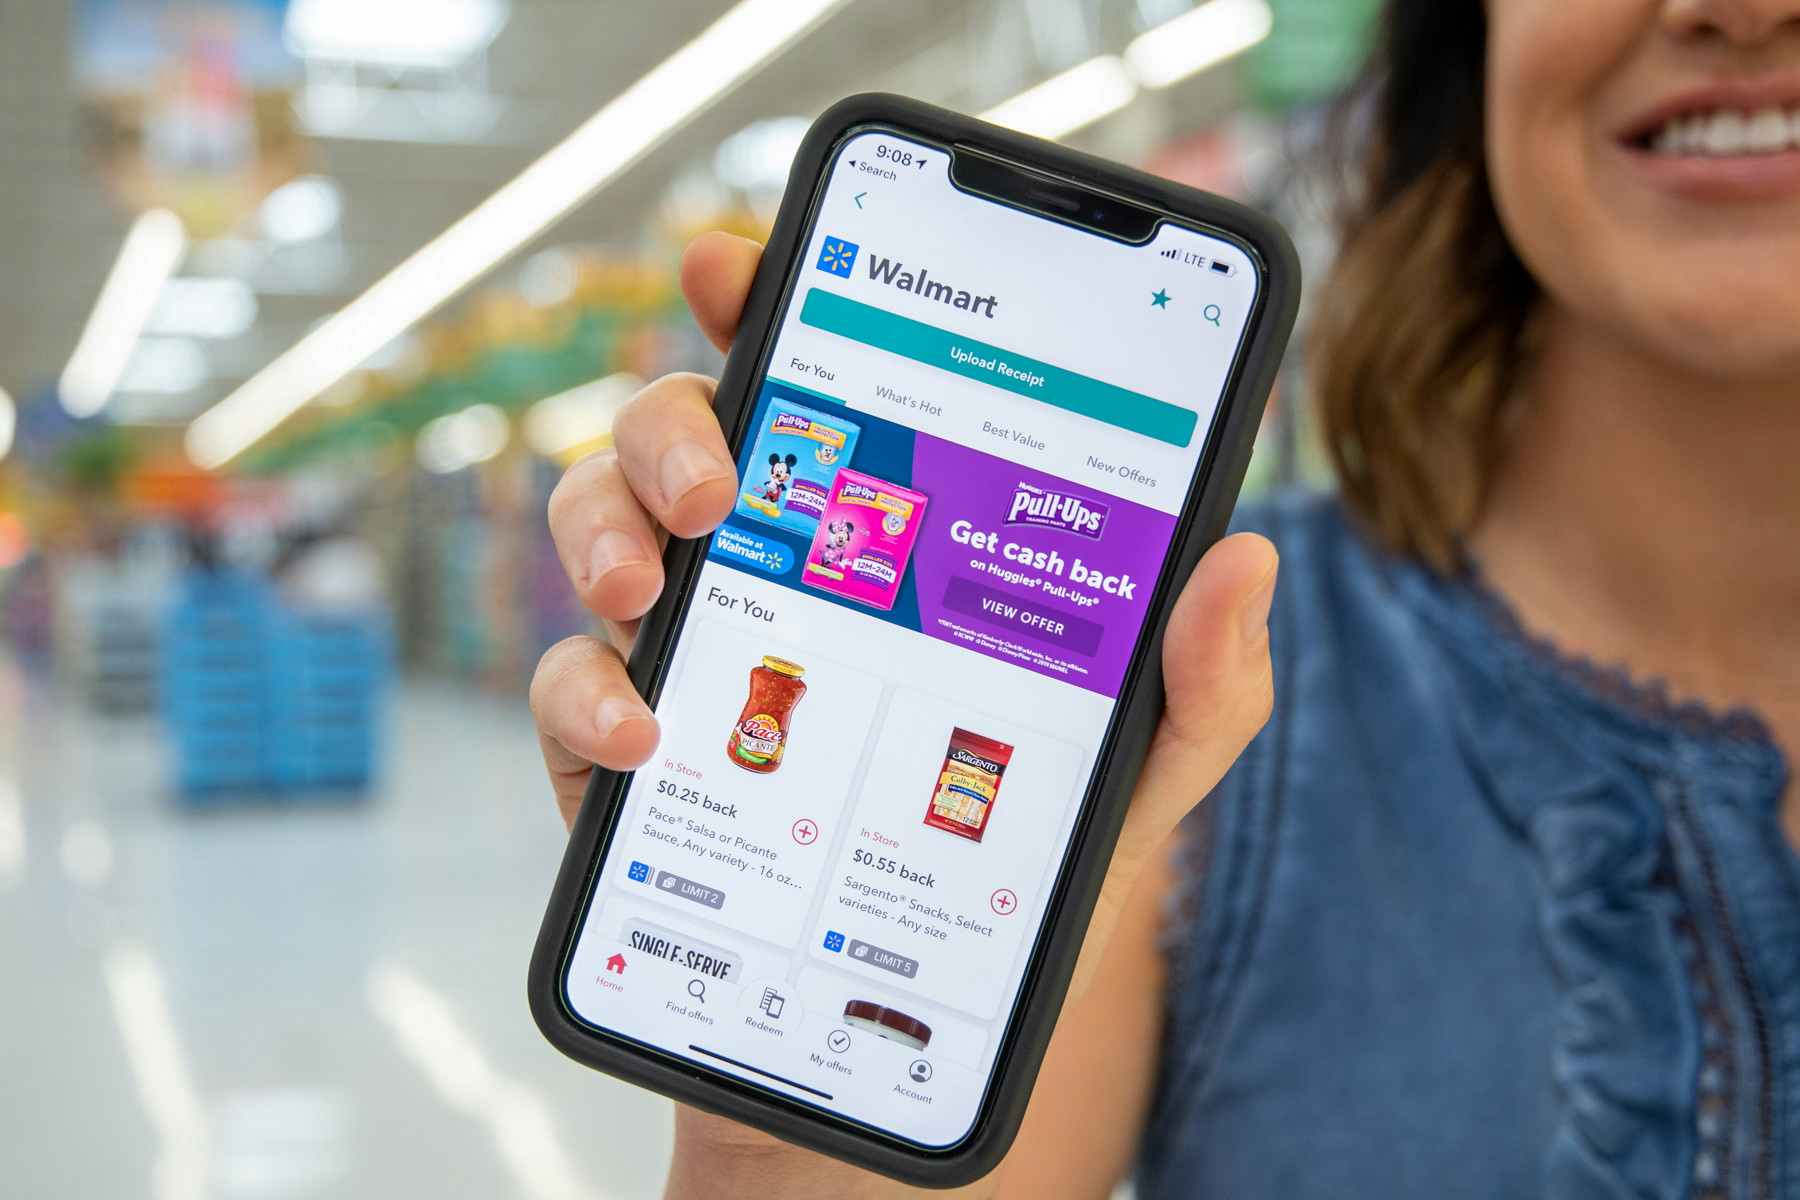 A person holding a smartphone with the ibotta app walmart section displayed.